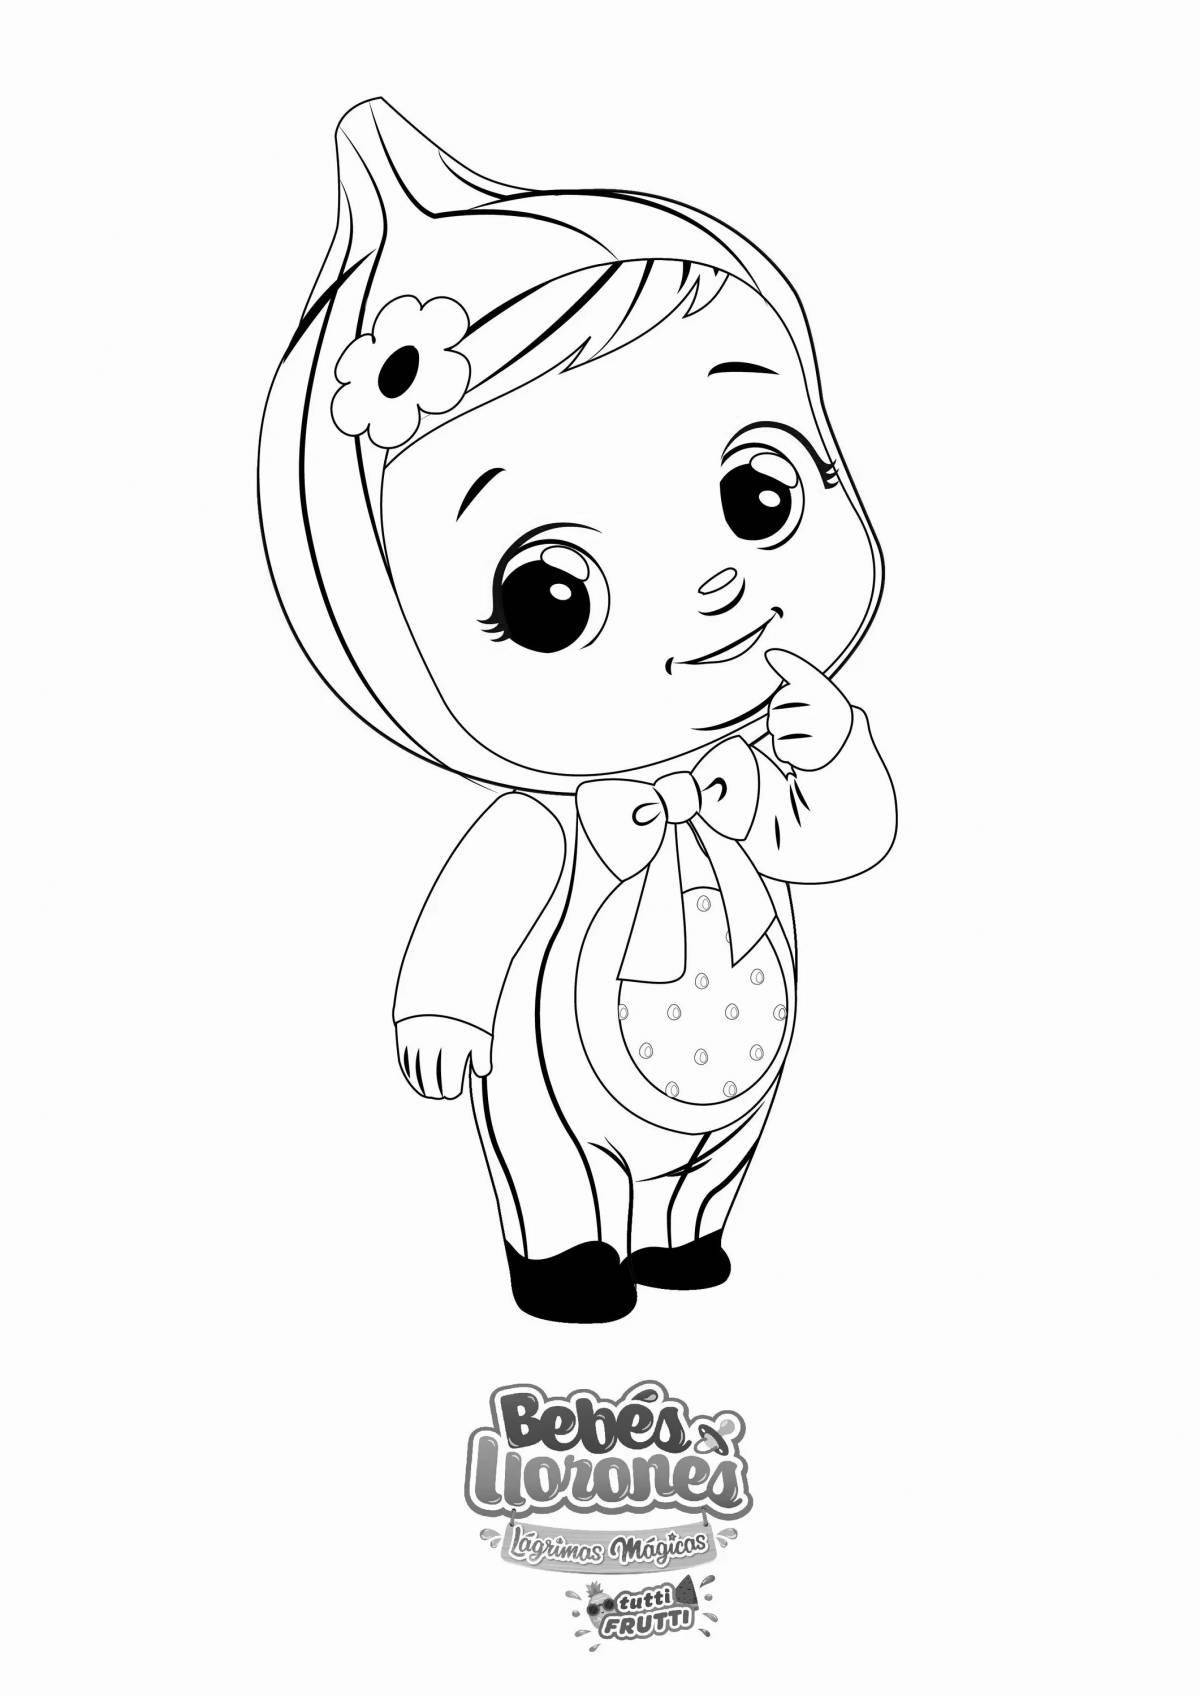 Playful baby's edge coloring book for kids